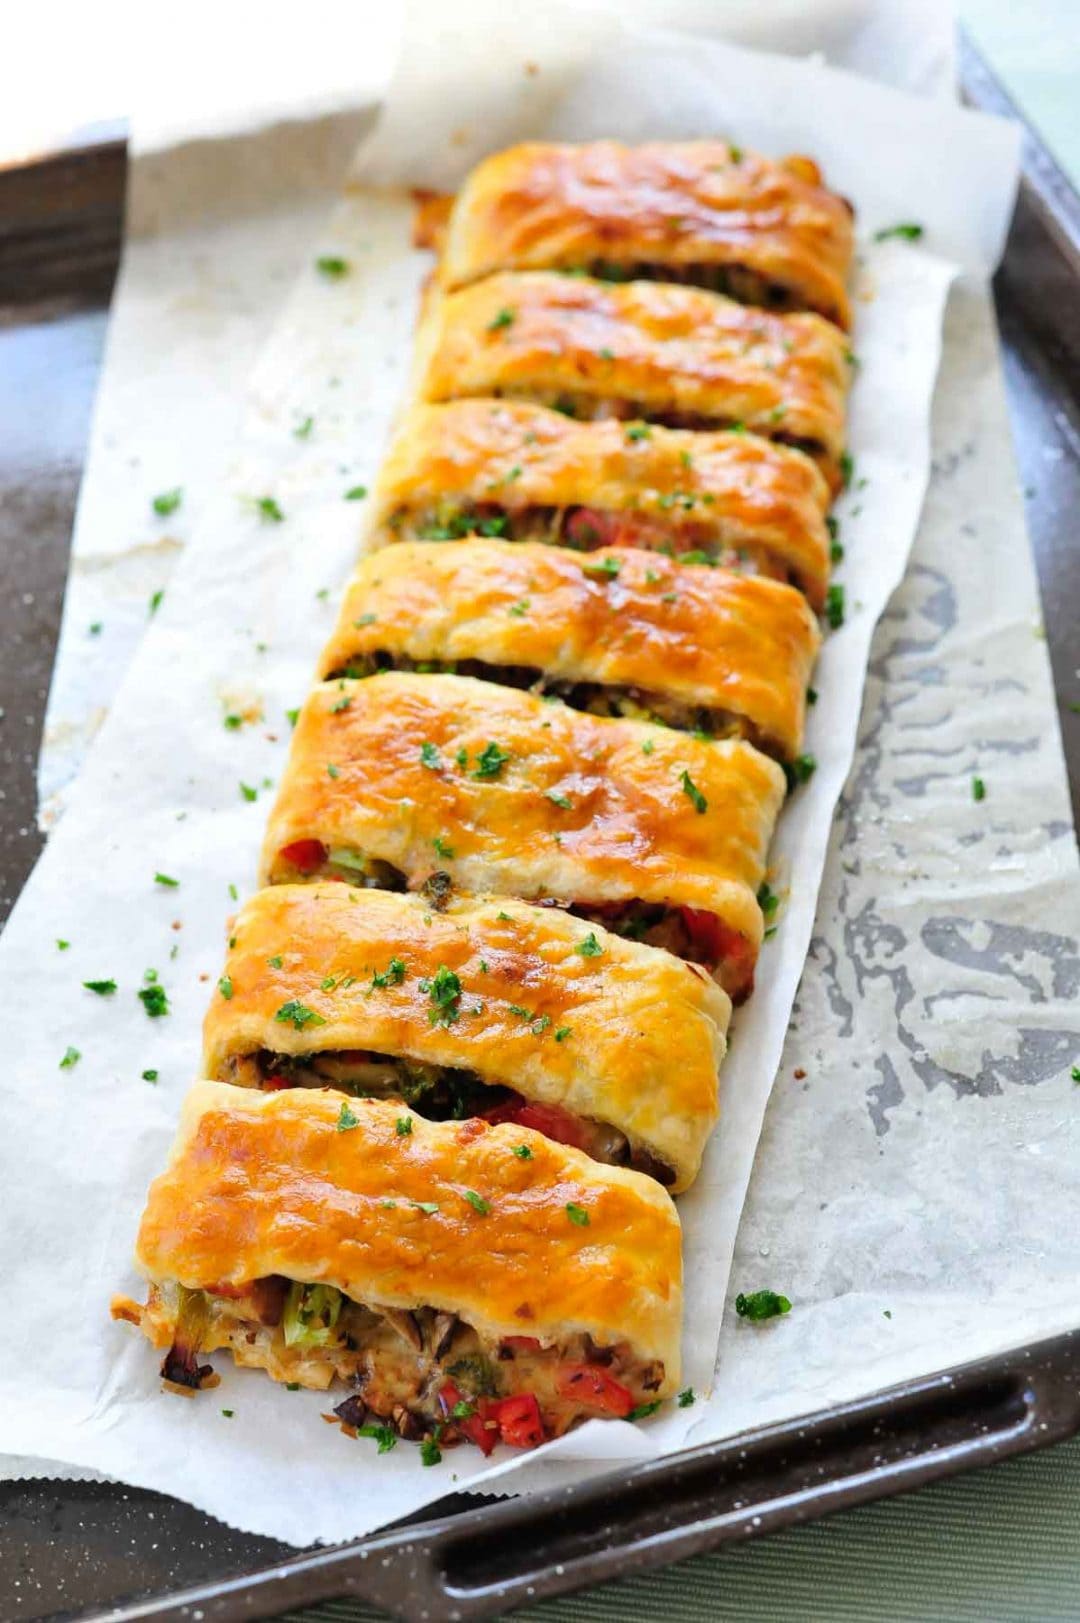 Puff Pastry Strudel With Vegetables Ciasto Francuskie Z Warzywami Everyday Delicious 1 1080x1623 